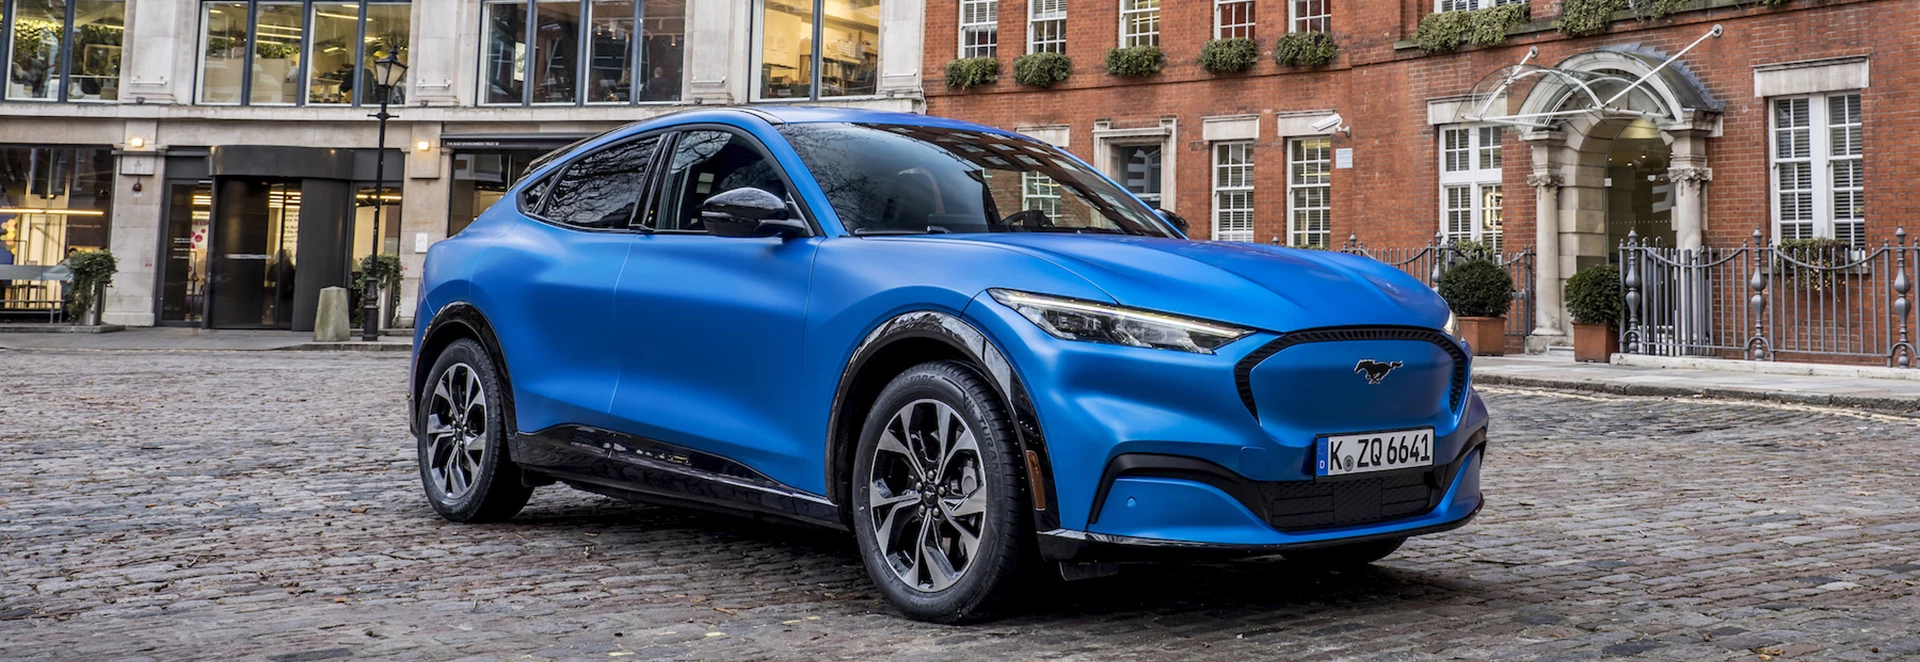 Go electric! 5 new EVs arriving in 2021 